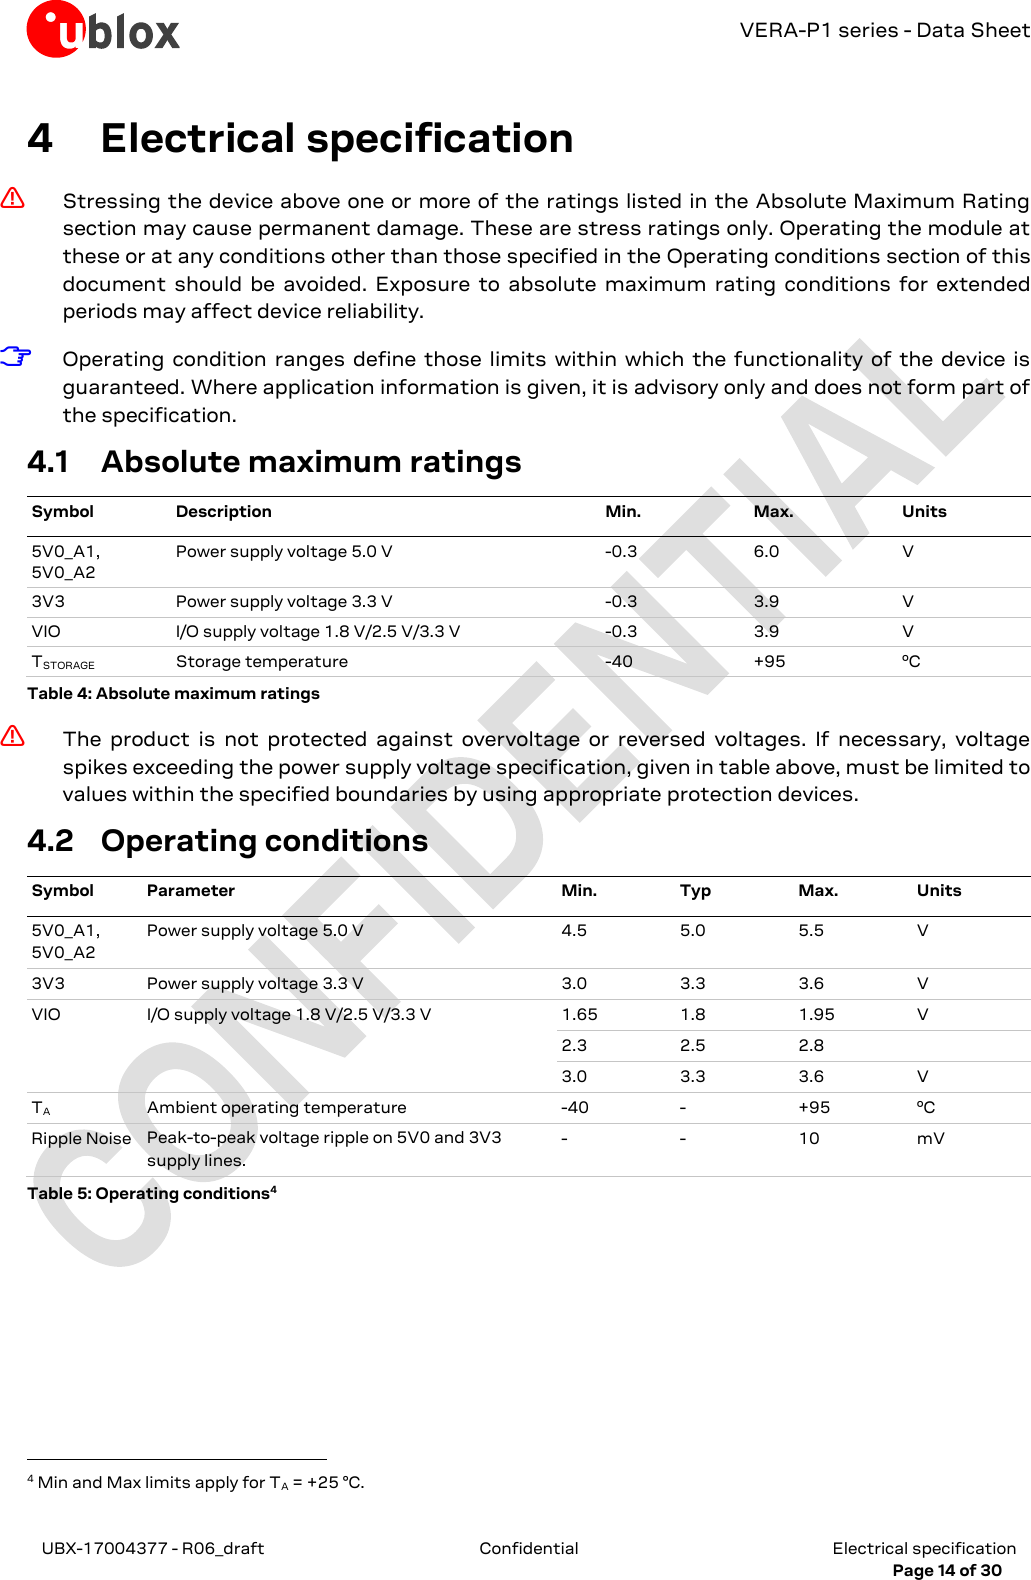 VERA-P1 series - Data Sheet UBX-17004377 - R06_draft Confidential  Electrical specification     Page 14 of 30 4 Electrical specification ⚠ Stressing the device above one or more of the ratings listed in the Absolute Maximum Rating section may cause permanent damage. These are stress ratings only. Operating the module at these or at any conditions other than those specified in the Operating conditions section of this document  should  be  avoided.  Exposure  to  absolute  maximum  rating  conditions  for  extended periods may affect device reliability. ☞ Operating  condition  ranges  define  those  limits  within  which  the  functionality  of  the  device  is guaranteed. Where application information is given, it is advisory only and does not form part of the specification. 4.1 Absolute maximum ratings Symbol Description Min.  Max. Units 5V0_A1, 5V0_A2 Power supply voltage 5.0 V -0.3 6.0 V 3V3 Power supply voltage 3.3 V -0.3 3.9 V VIO I/O supply voltage 1.8 V/2.5 V/3.3 V -0.3 3.9 V TSTORAGE Storage temperature -40 +95 ºC Table 4: Absolute maximum ratings ⚠ The  product  is  not  protected  against  overvoltage  or  reversed  voltages.  If  necessary,  voltage spikes exceeding the power supply voltage specification, given in table above, must be limited to values within the specified boundaries by using appropriate protection devices. 4.2 Operating conditions Symbol Parameter Min.  Typ Max. Units 5V0_A1, 5V0_A2 Power supply voltage 5.0 V 4.5 5.0 5.5 V 3V3 Power supply voltage 3.3 V 3.0 3.3 3.6 V VIO I/O supply voltage 1.8 V/2.5 V/3.3 V 1.65 1.8 1.95  V 2.3 2.5 2.8  3.0 3.3 3.6 V TA Ambient operating temperature -40 - +95 ºC Ripple Noise Peak-to-peak voltage ripple on 5V0 and 3V3 supply lines. - - 10 mV Table 5: Operating conditions4                                                                  4 Min and Max limits apply for TA = +25 °C. 